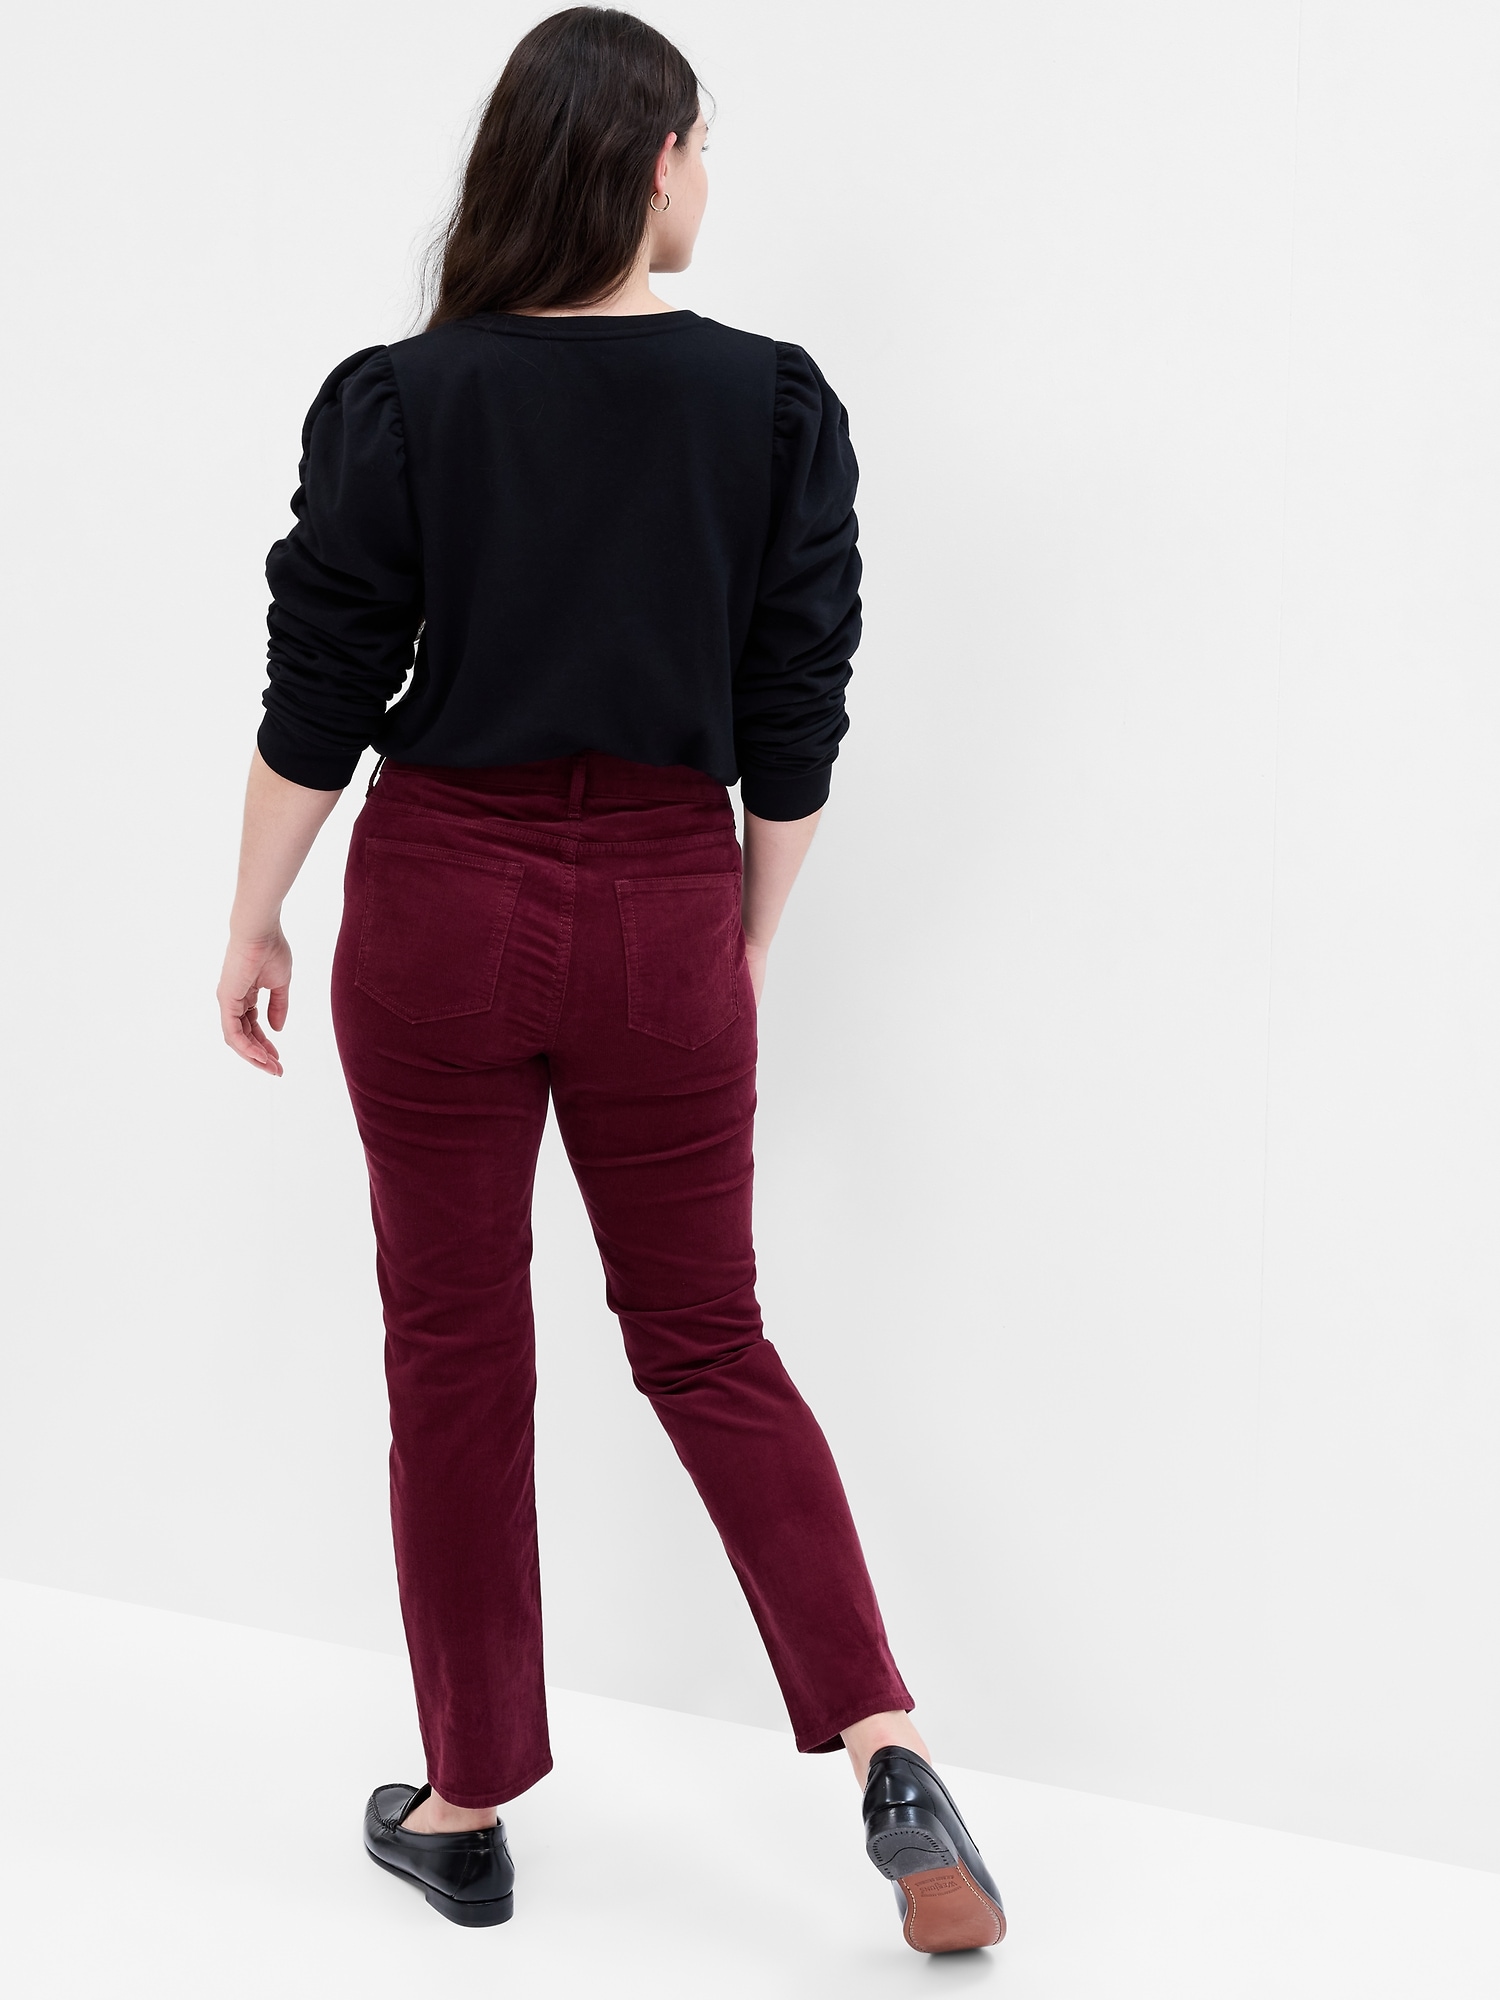 Preview Classic Straight Leg Pants